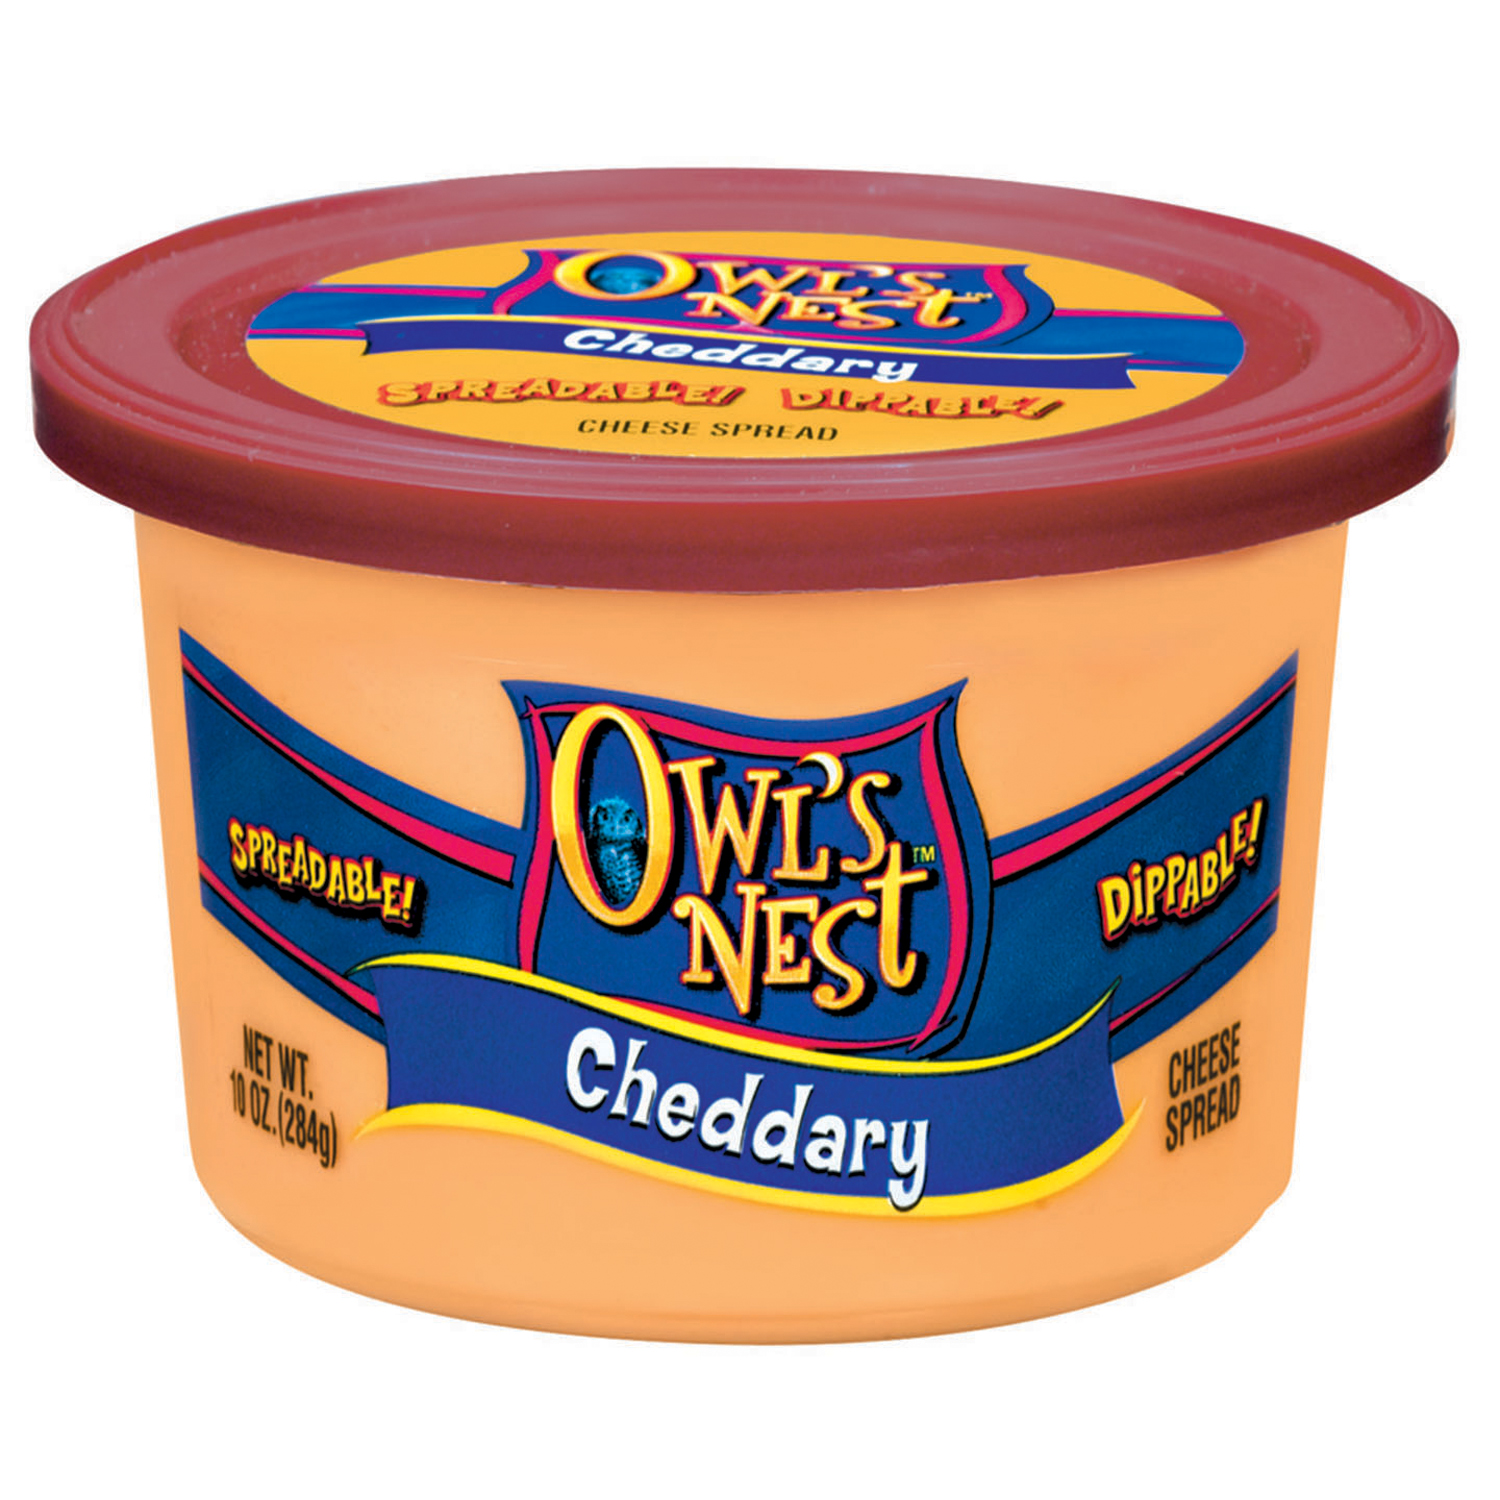 Owl's Nest Cheese Spread, Cheddary, 12 oz (340 g)